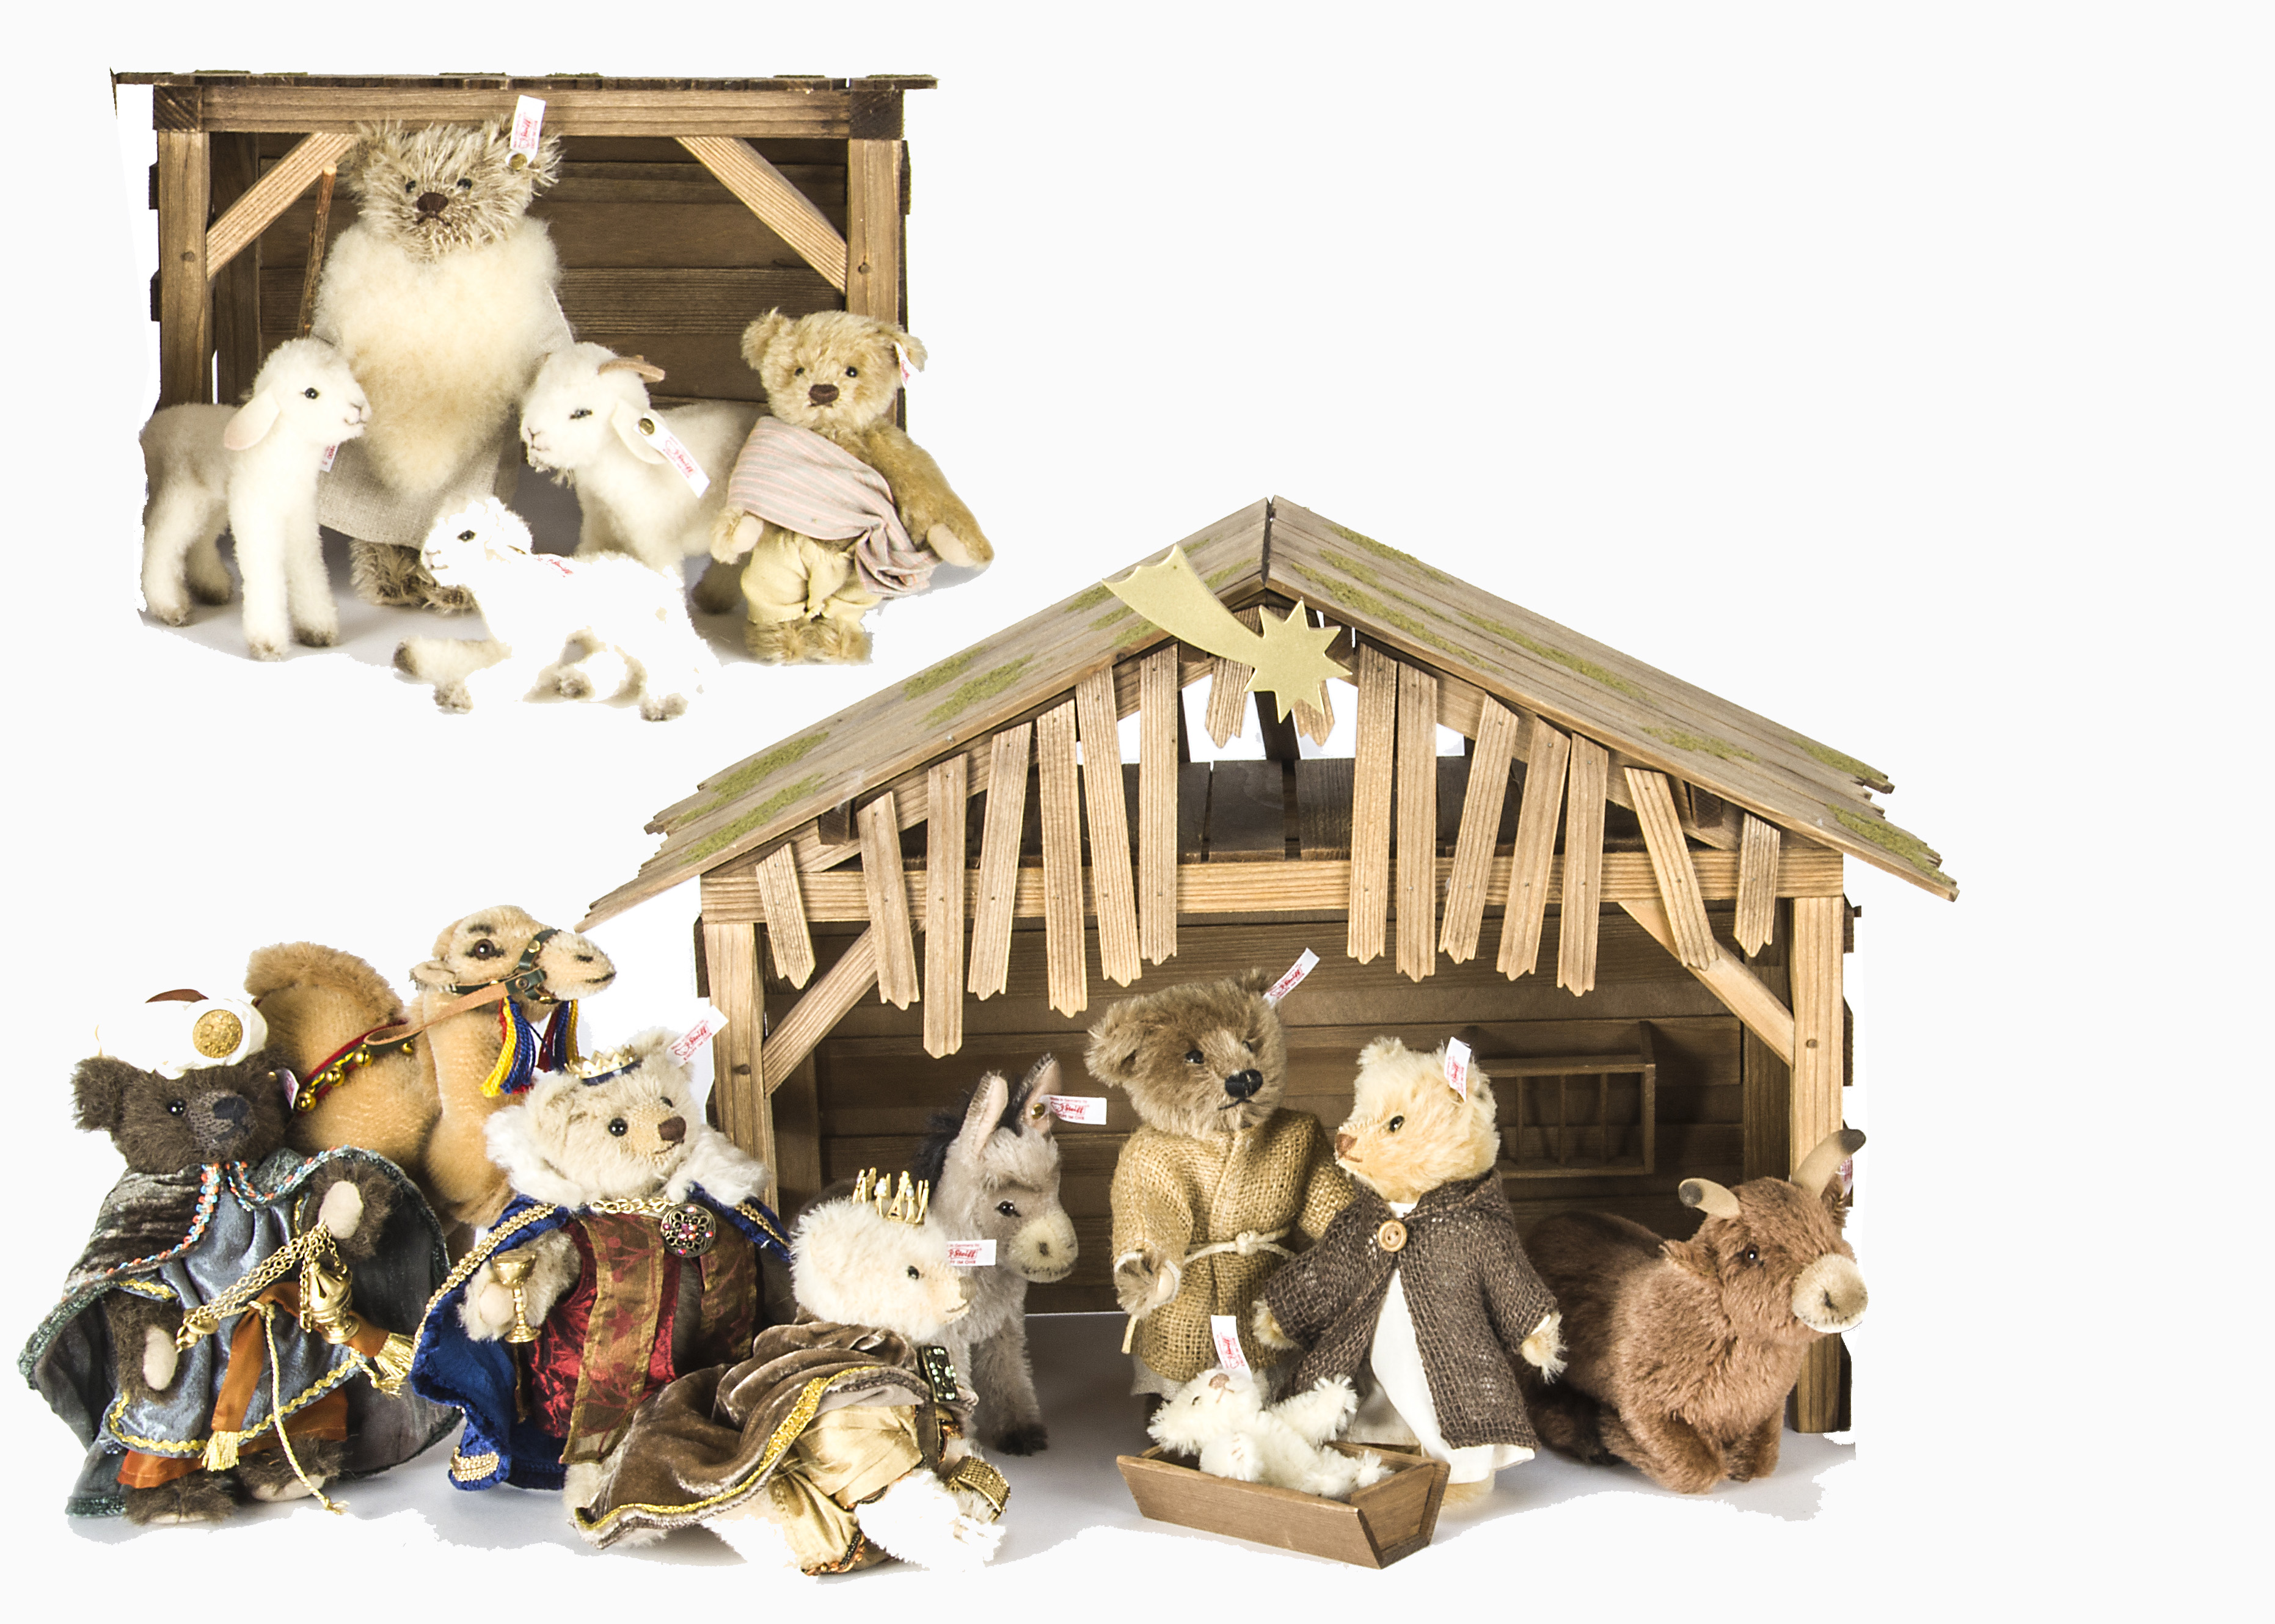 Steiff limited edition Nativity Sets 2005 to 2007, The Holy Family 74 of 1000, 2005; the Shepherds